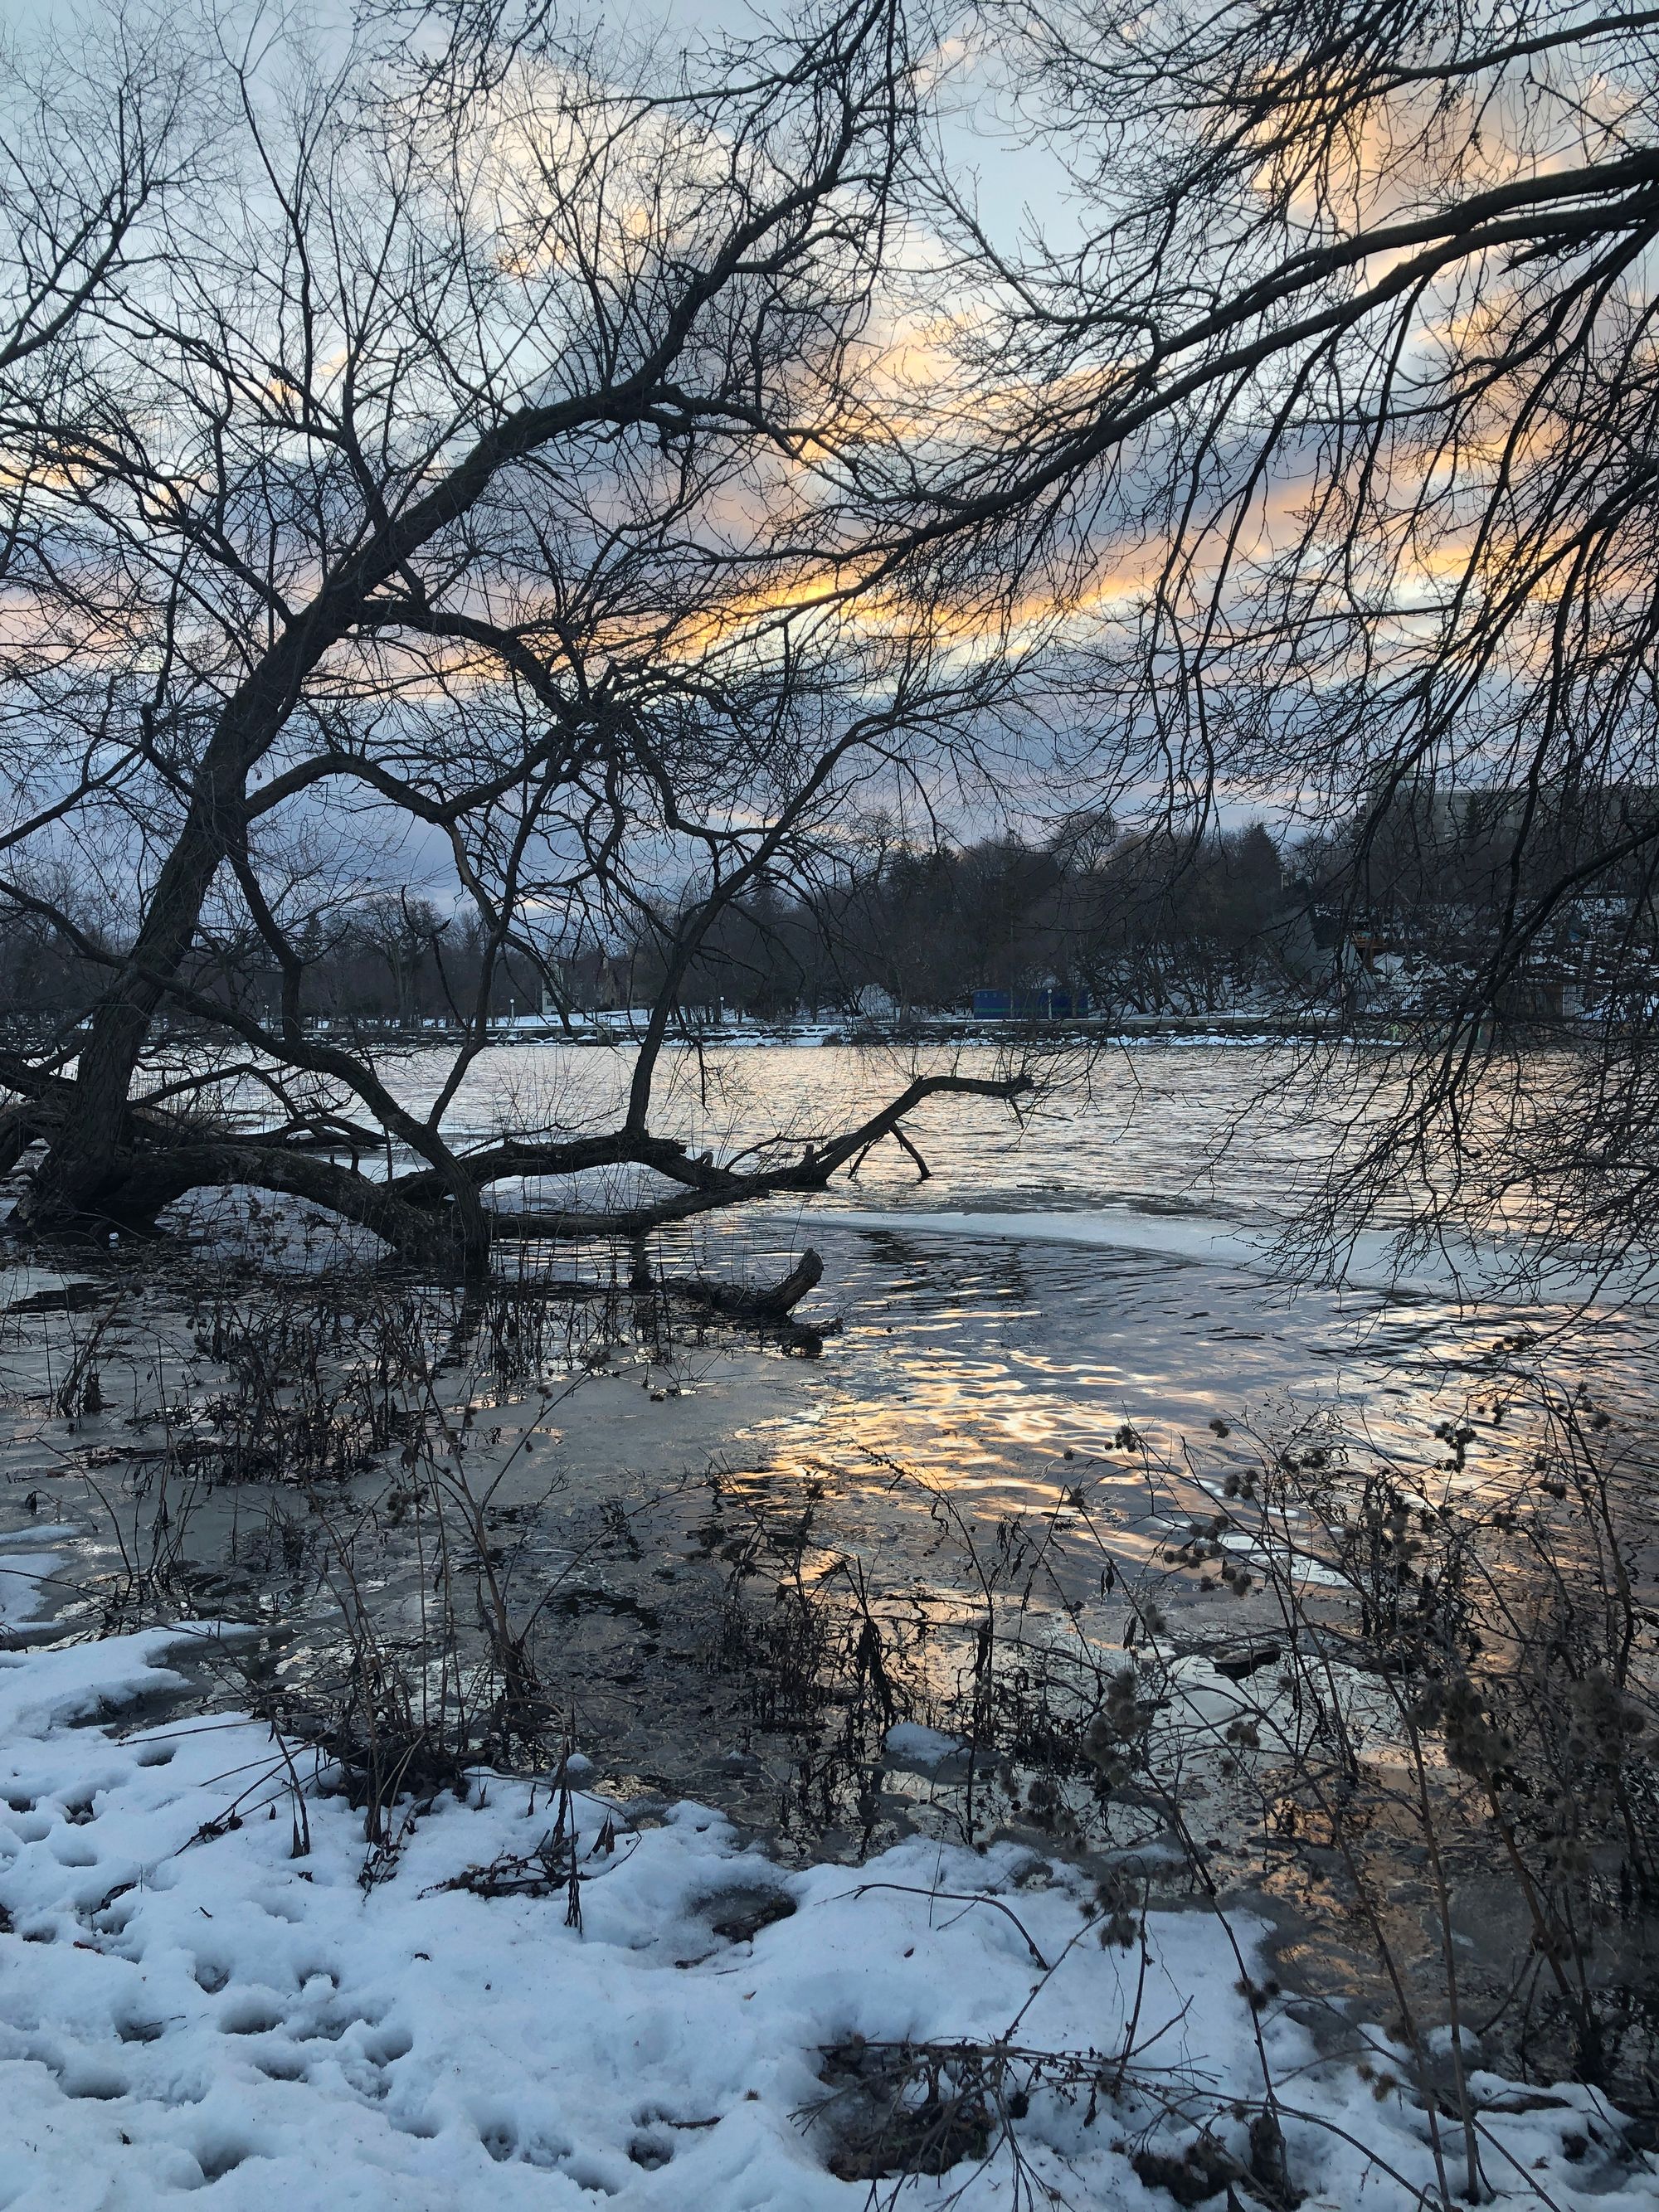 A partially frozen river, edged in trampled snow and thistles, reflecting the last light of the day in warm ripples of gold. Around the edges of the photo are bare trees tangling thin branches into the sun-limned clouds above.